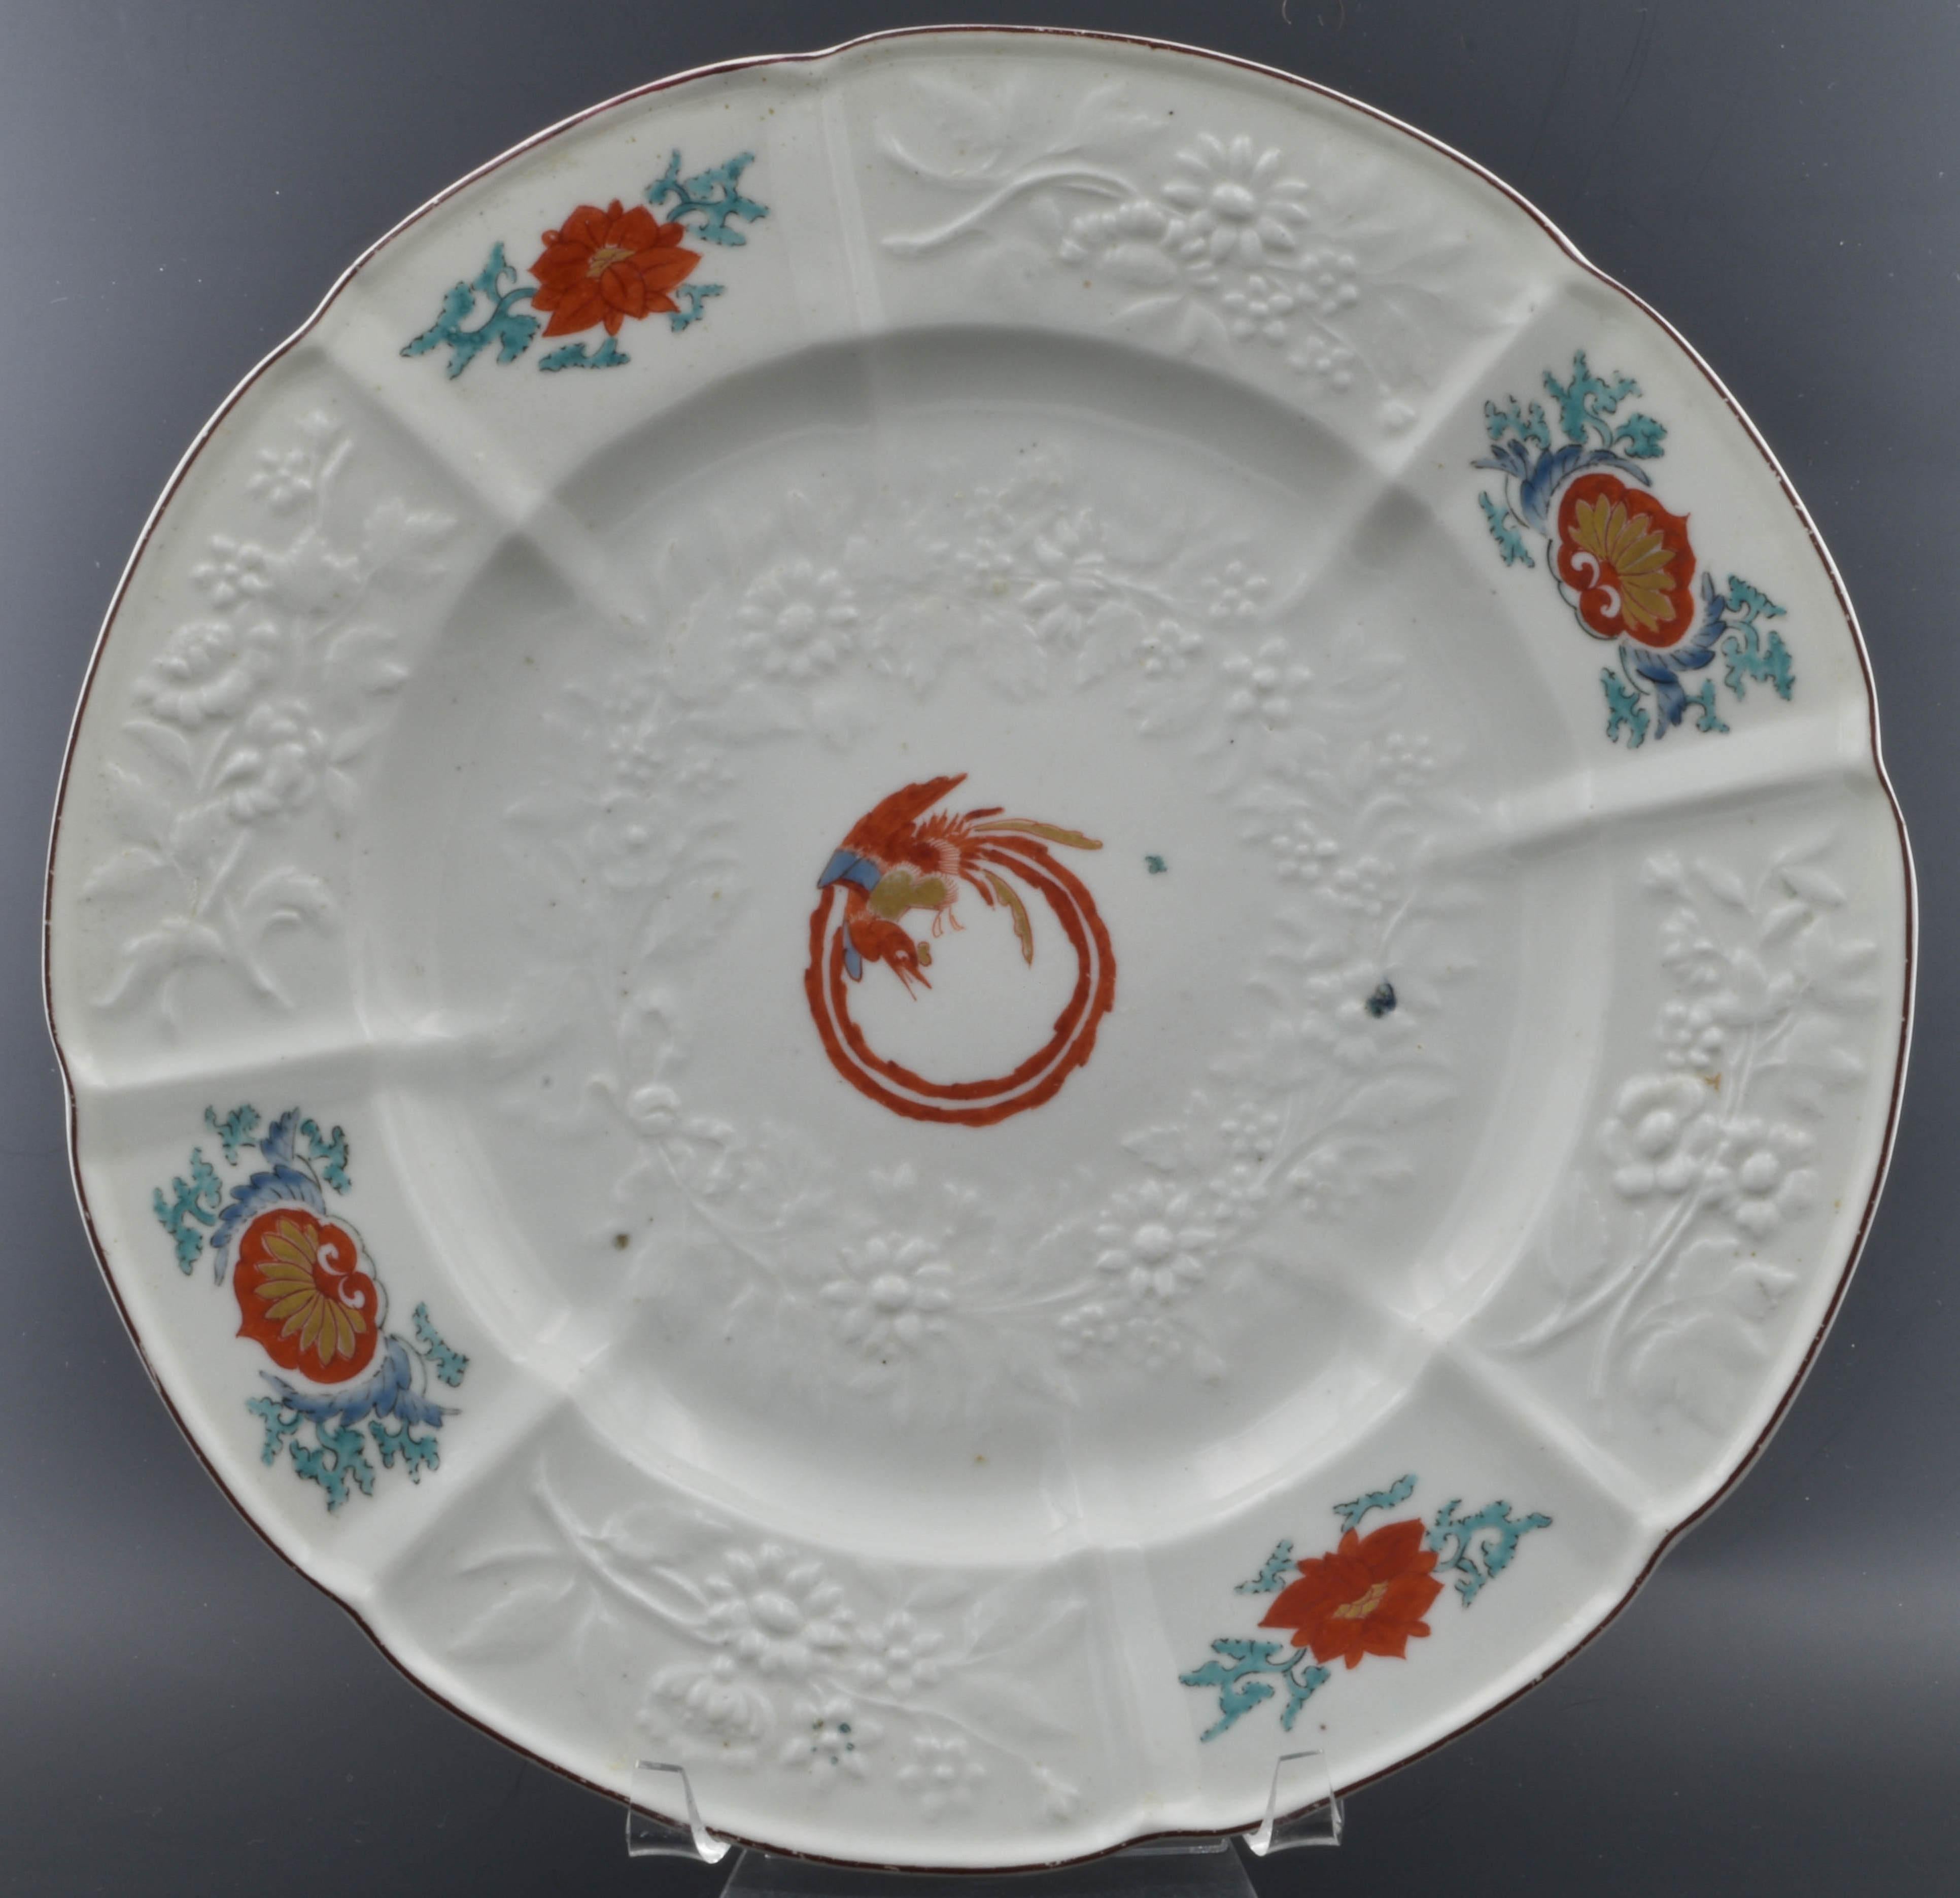 A very fine plate, damasked with Gotzkowsky erhaben Blumen. Decorated after the Japanese with peonies and a coiled phoenix to the centre, using the Kakiemon palette.

The coiled phoenix is a traditional design that appears on various forms of